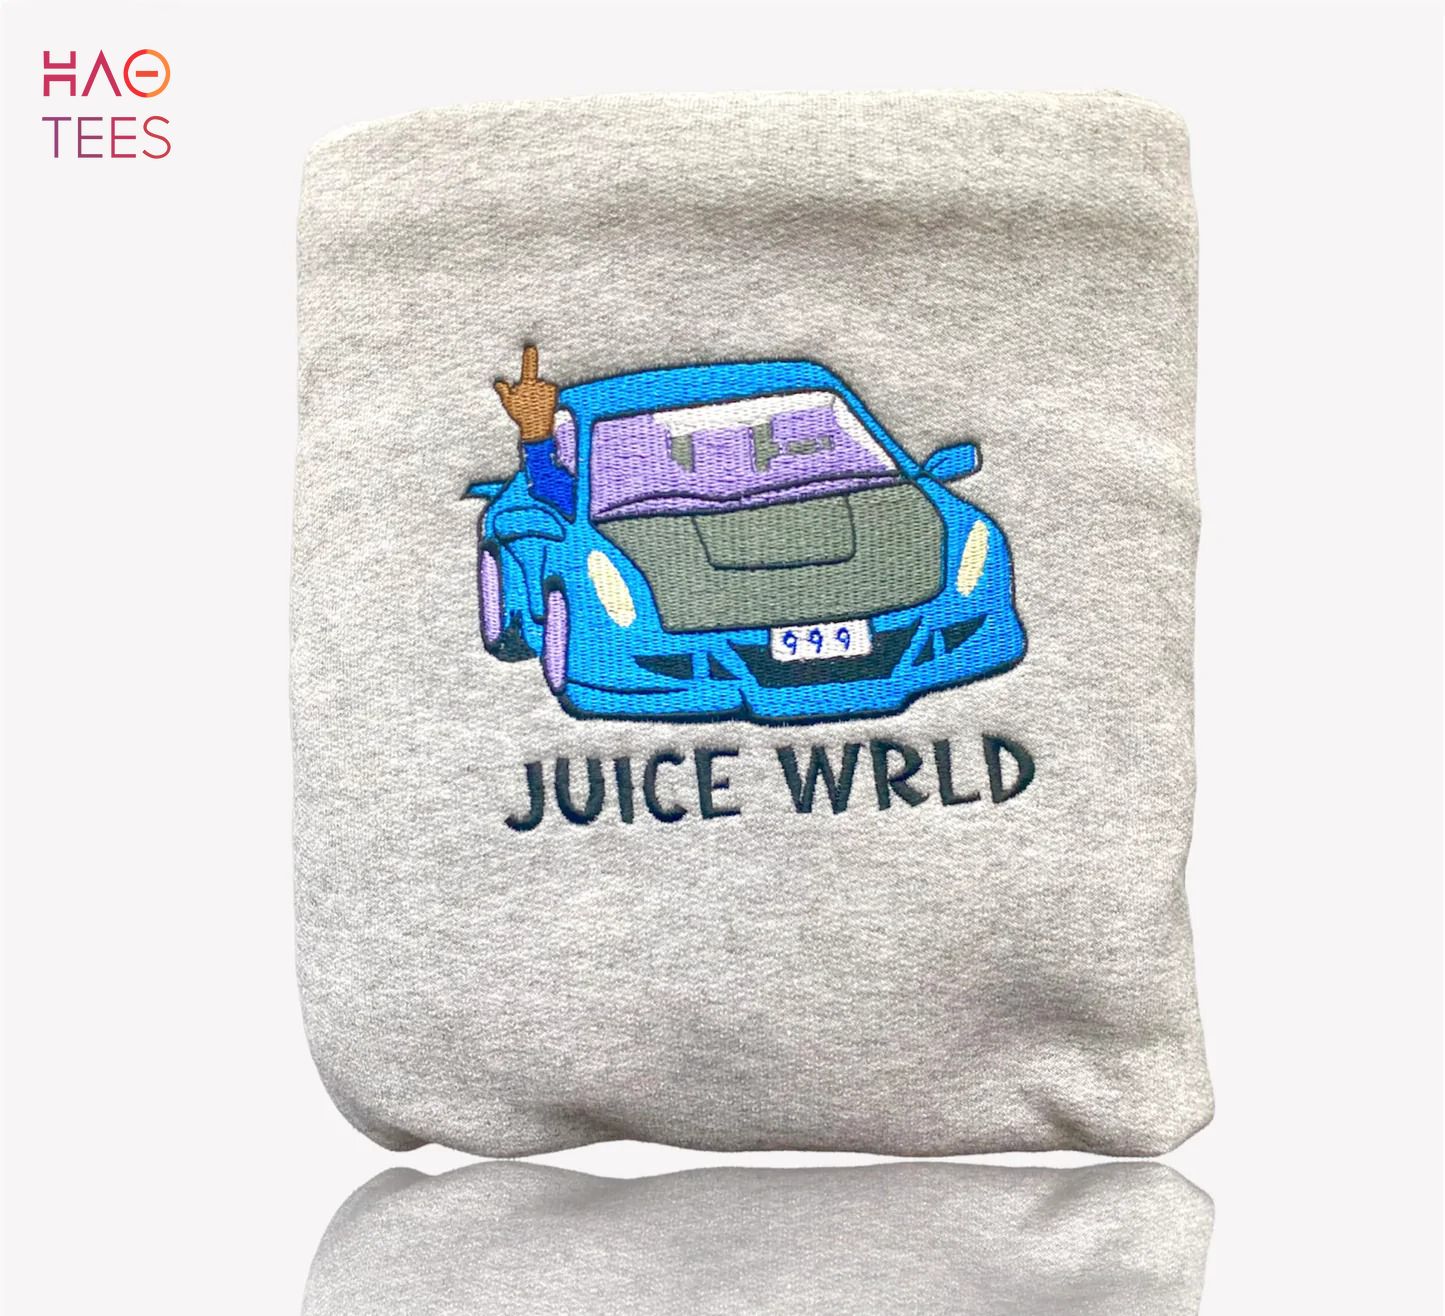 Best Selling Product] Juice Wrld 999 Future On Drugs Over The World High  Fashion Hoodie Dress